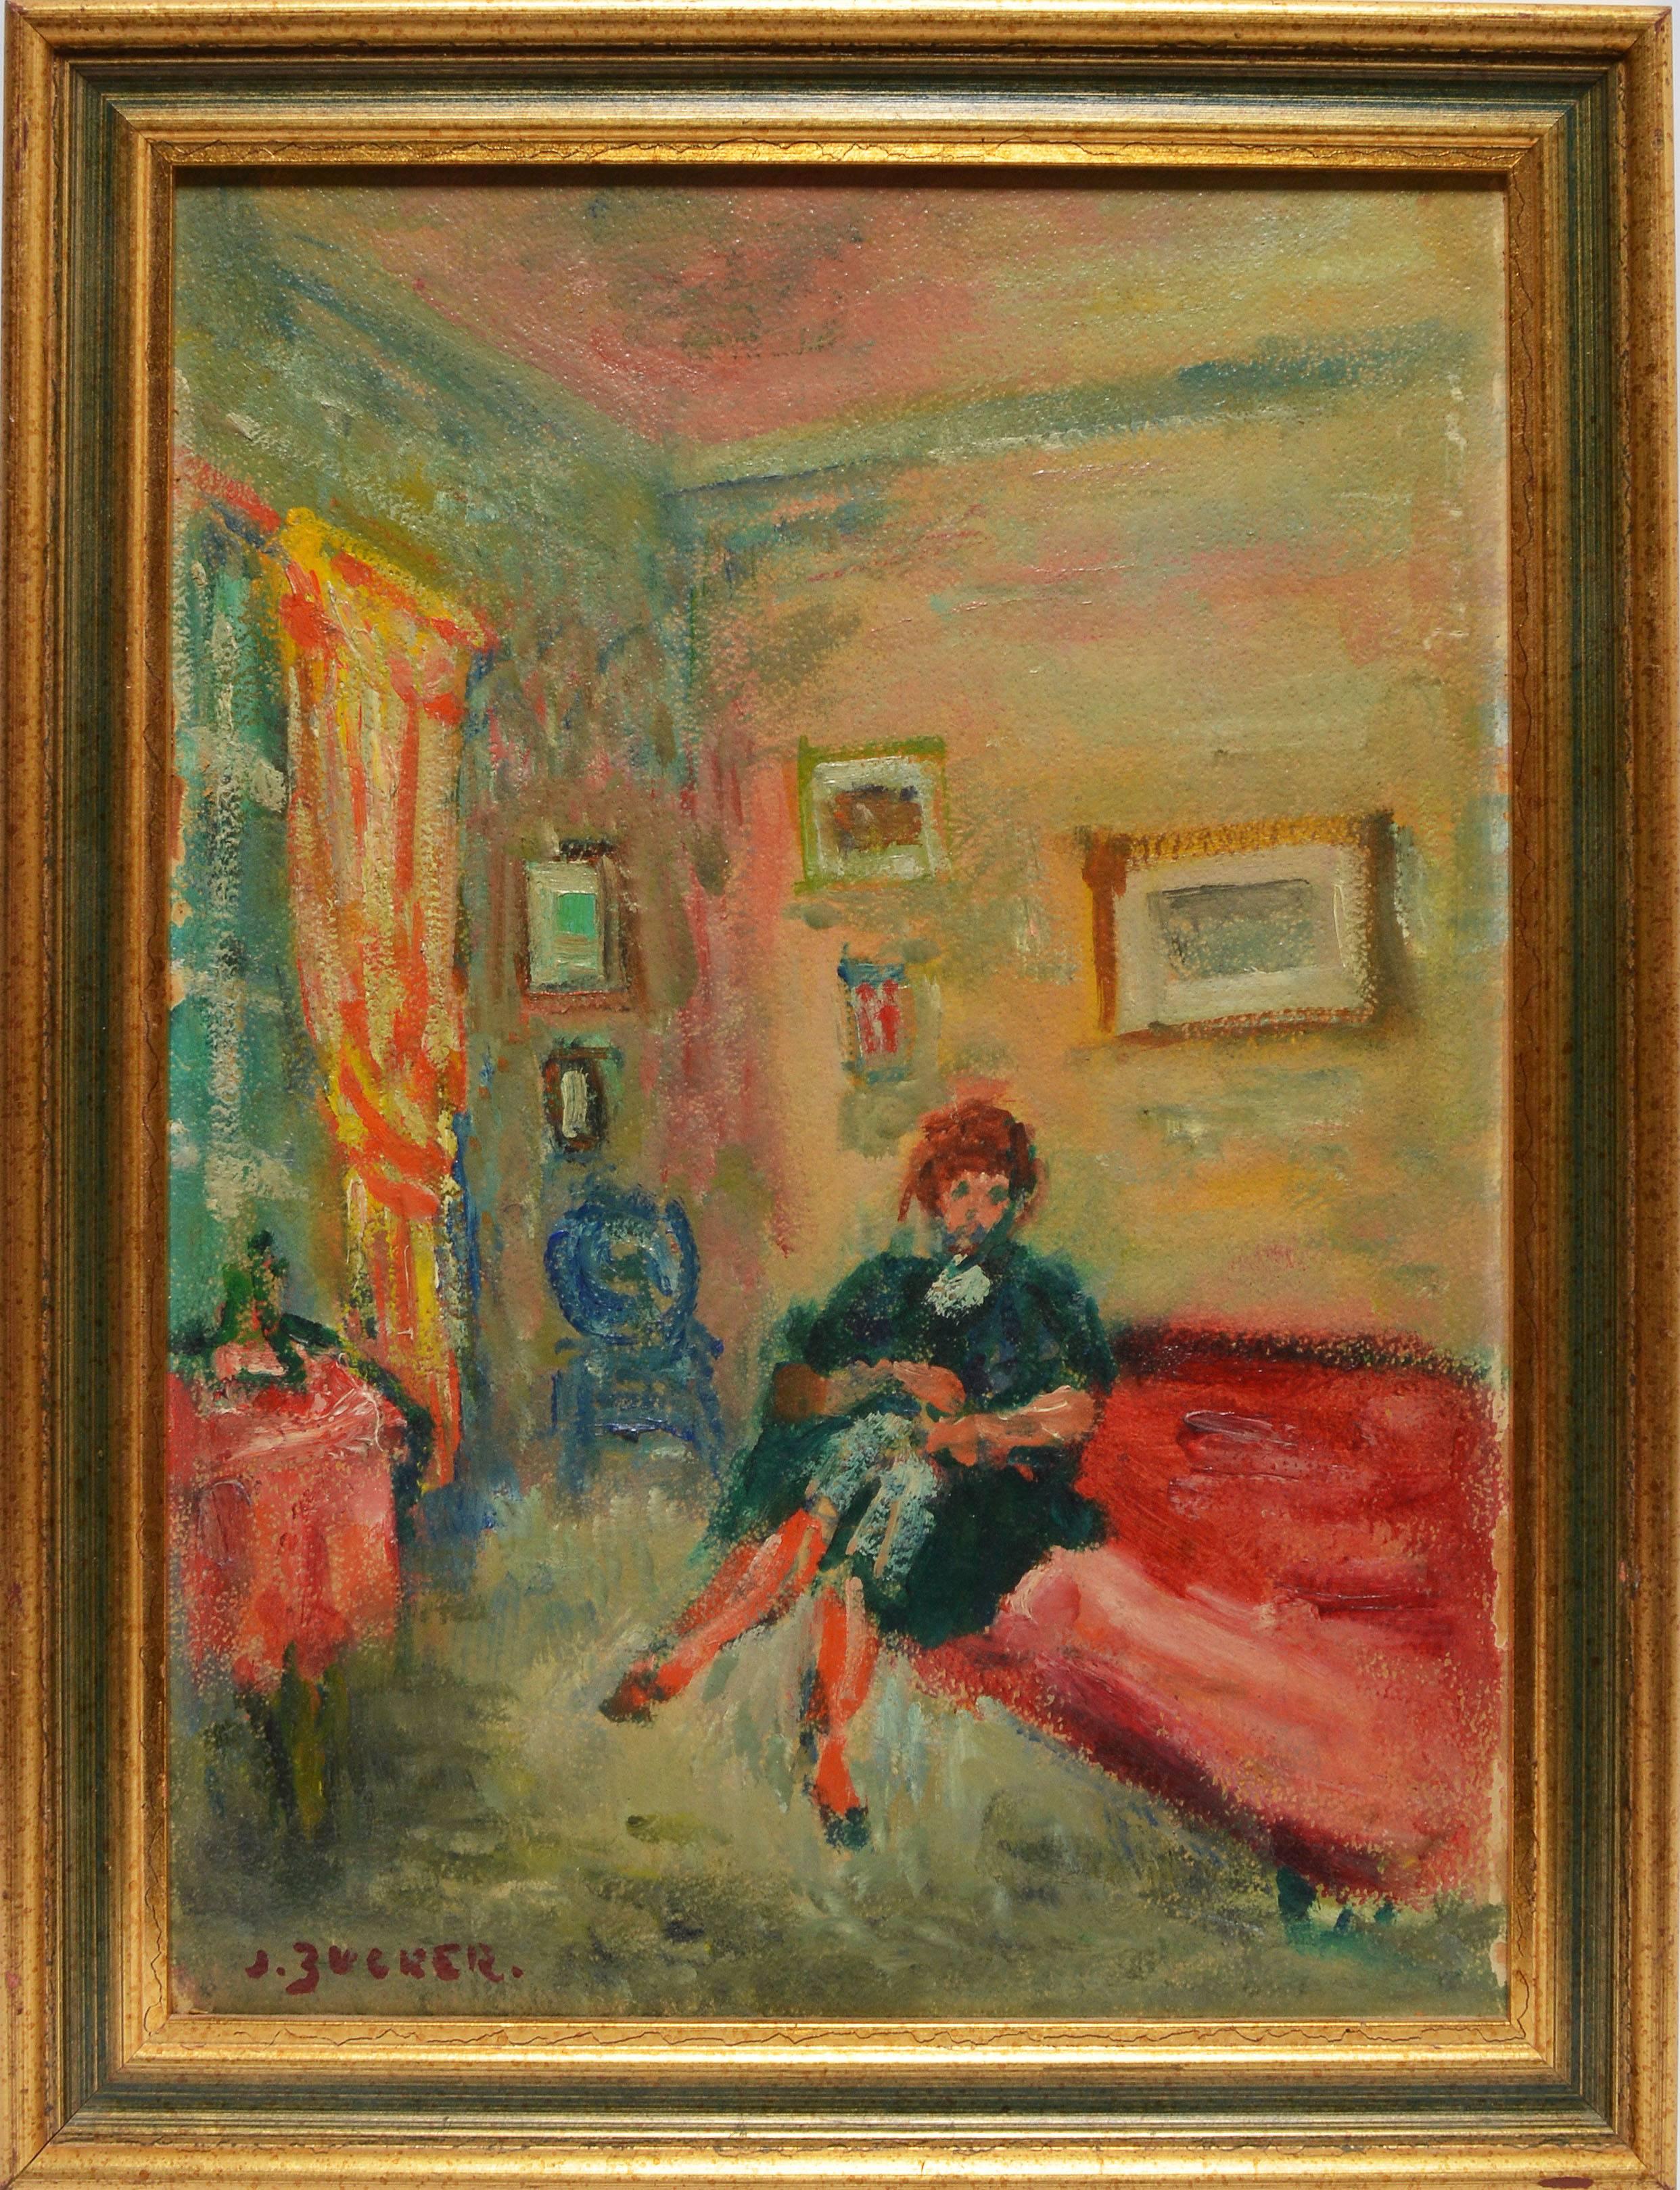 Modernist view of an interior by Jacques Zucker  (1900 - 1981).  Oil on canvas, circa 1940.  Signed lower left, "J. Zucker".  Displayed in a period frame.  Image size, 9.5"L x 13"H, overall 12"L x 15"H.